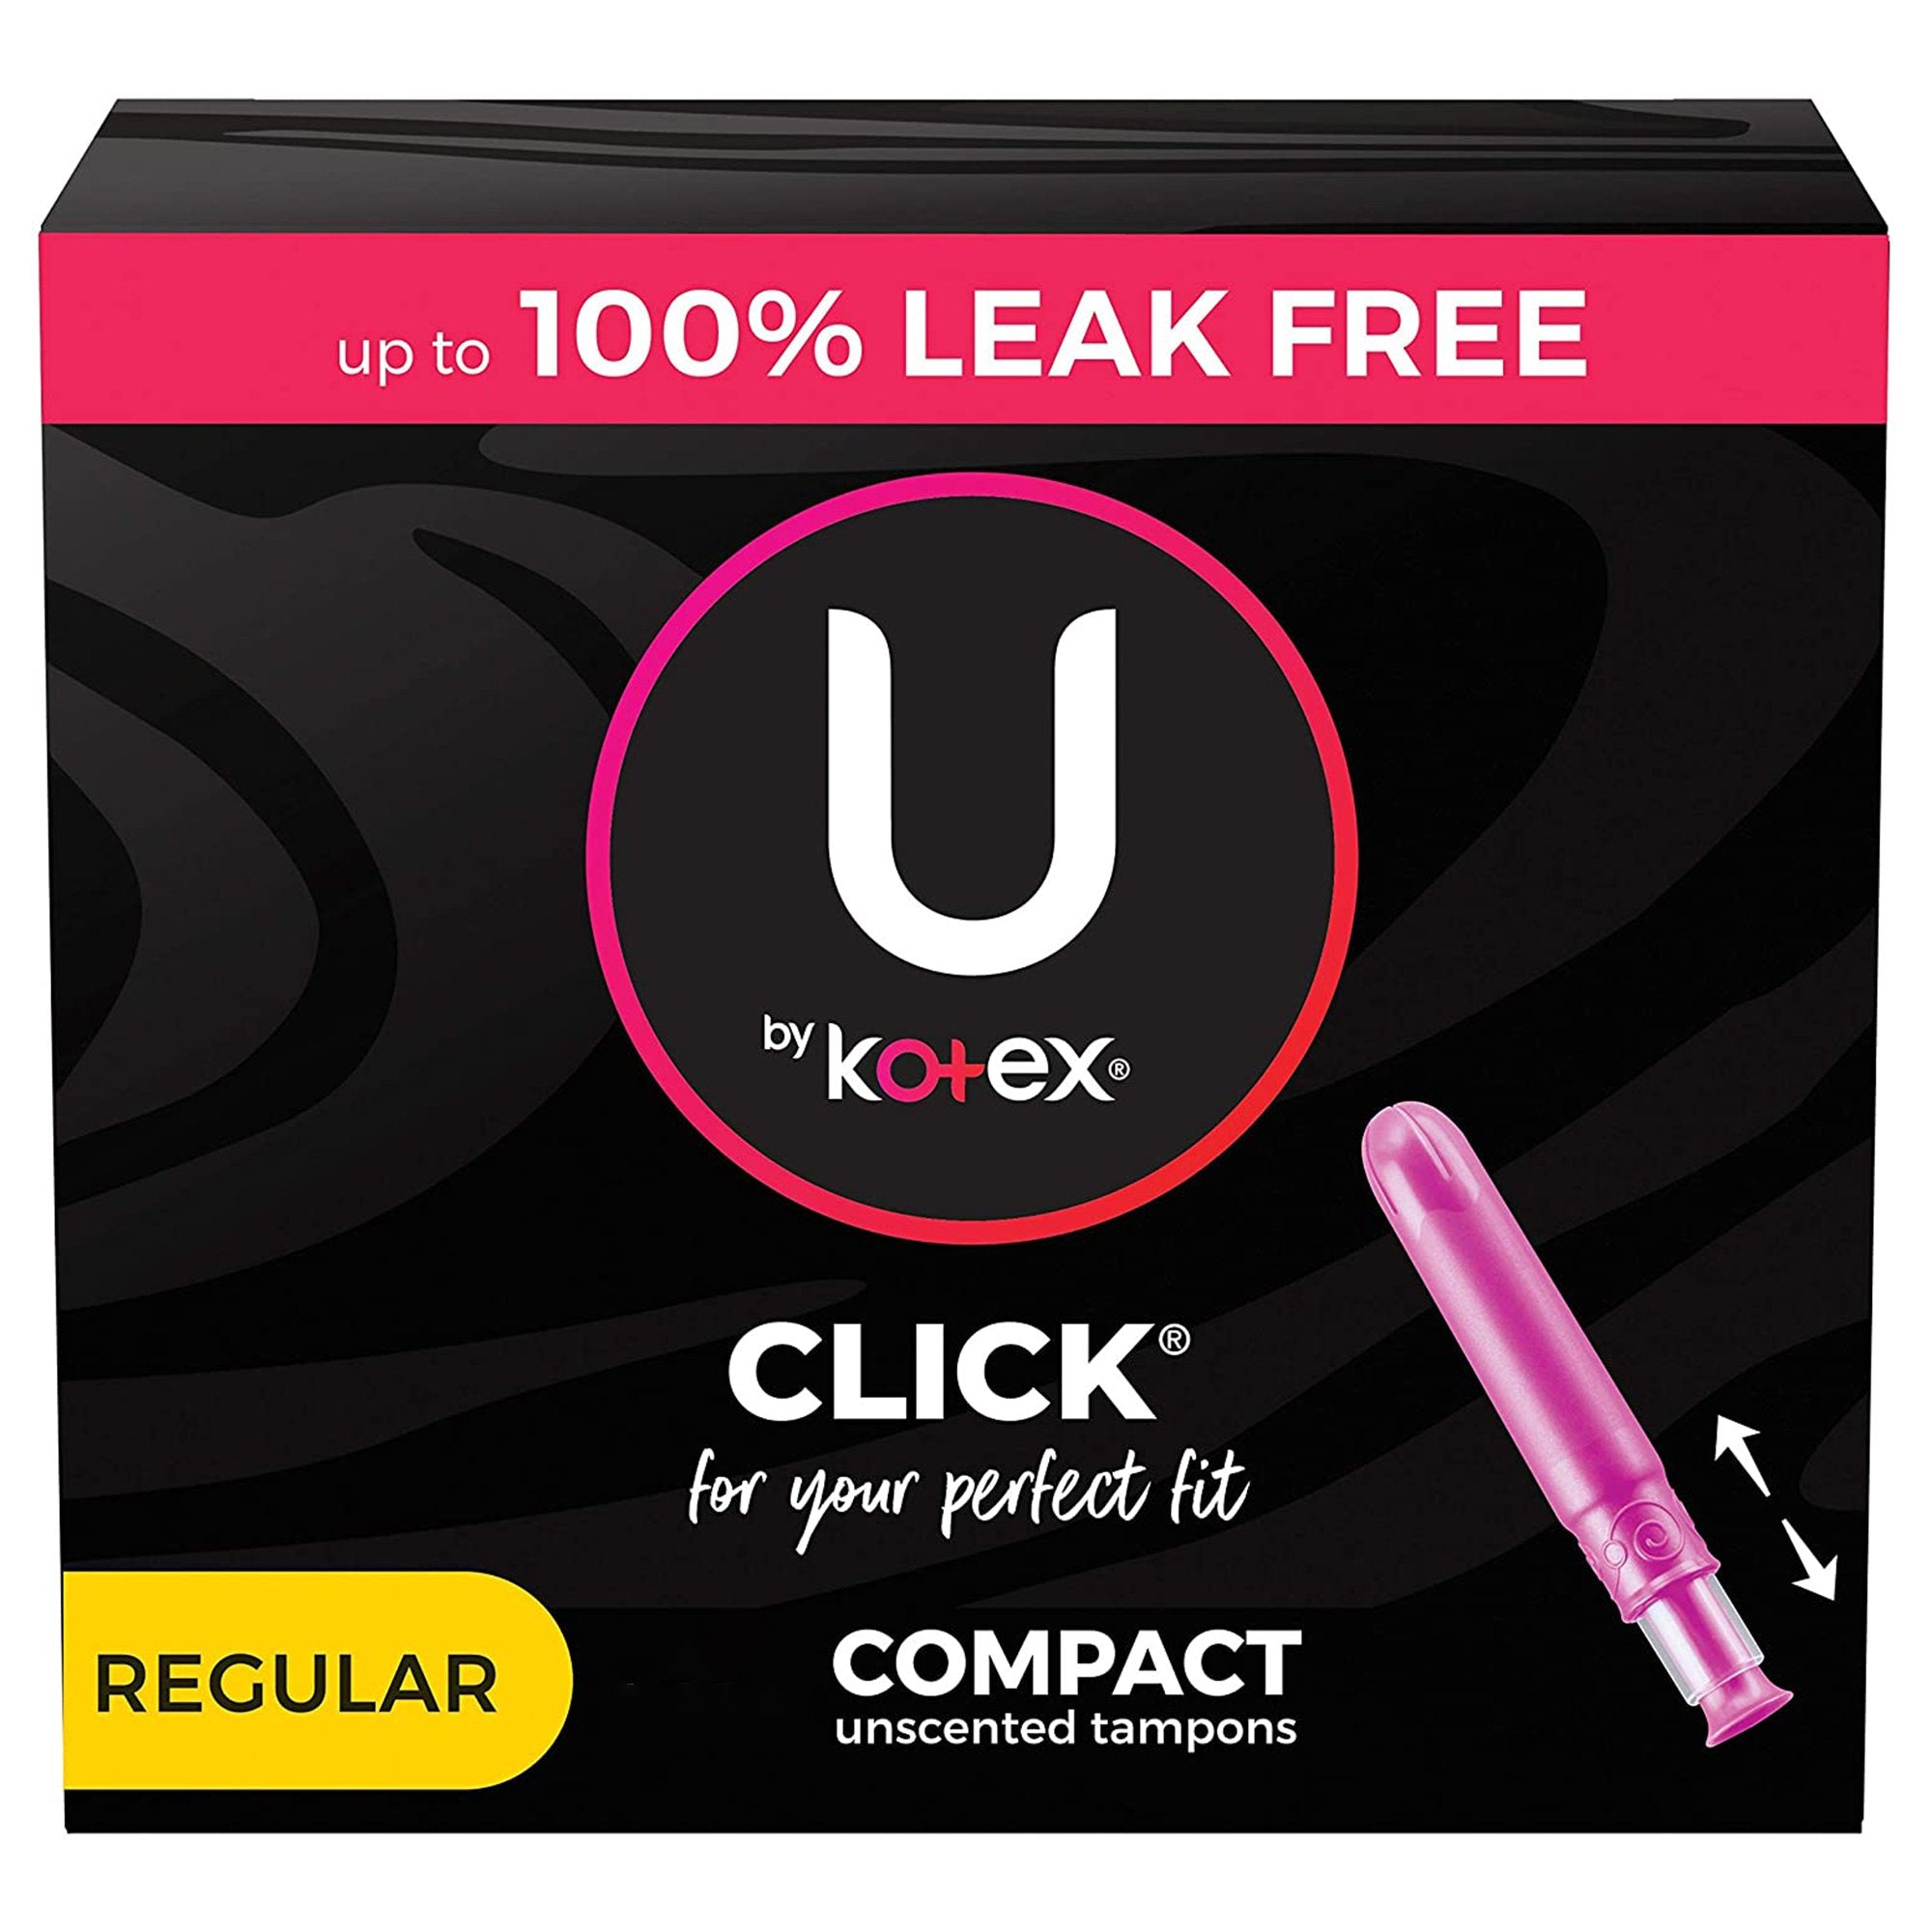 Tampon U by Kotex Click Regular Absorbency Plastic Applicator Individually Wrapped